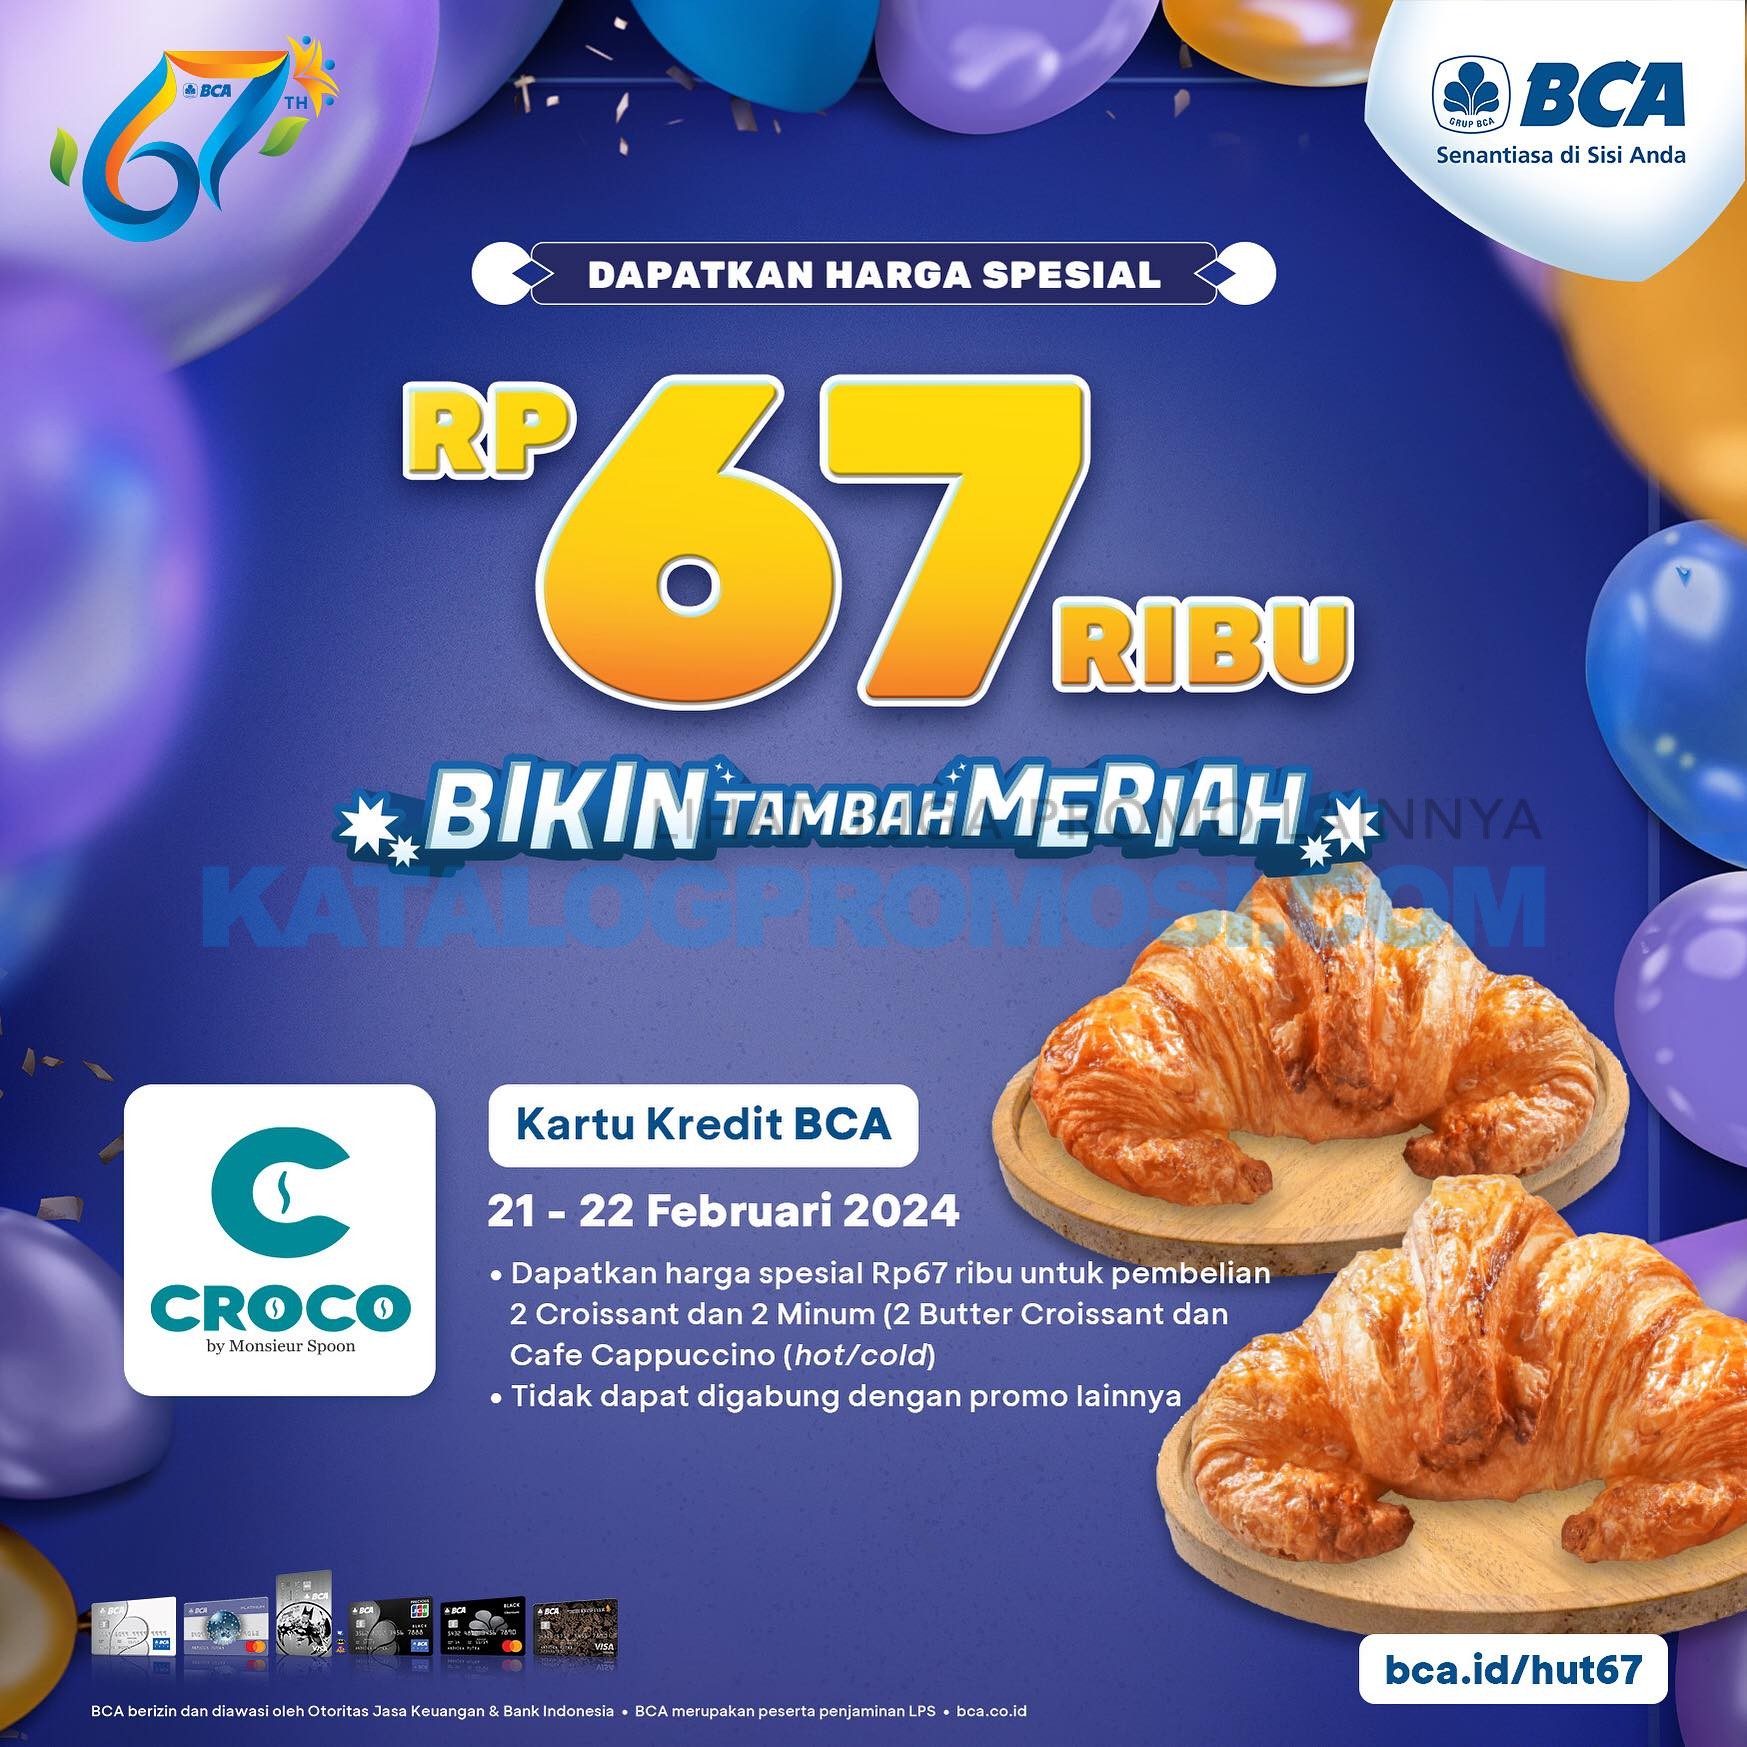 Promo Cro.Co by Monsieur Spoon HUT BCA 67 - Get 2 Butter Croissant and 2 Iced/Hot Cafe Cappucino for only IDR 67,000++! berlaku hanya 2 hari, tanggal 21-22 Februari 2024